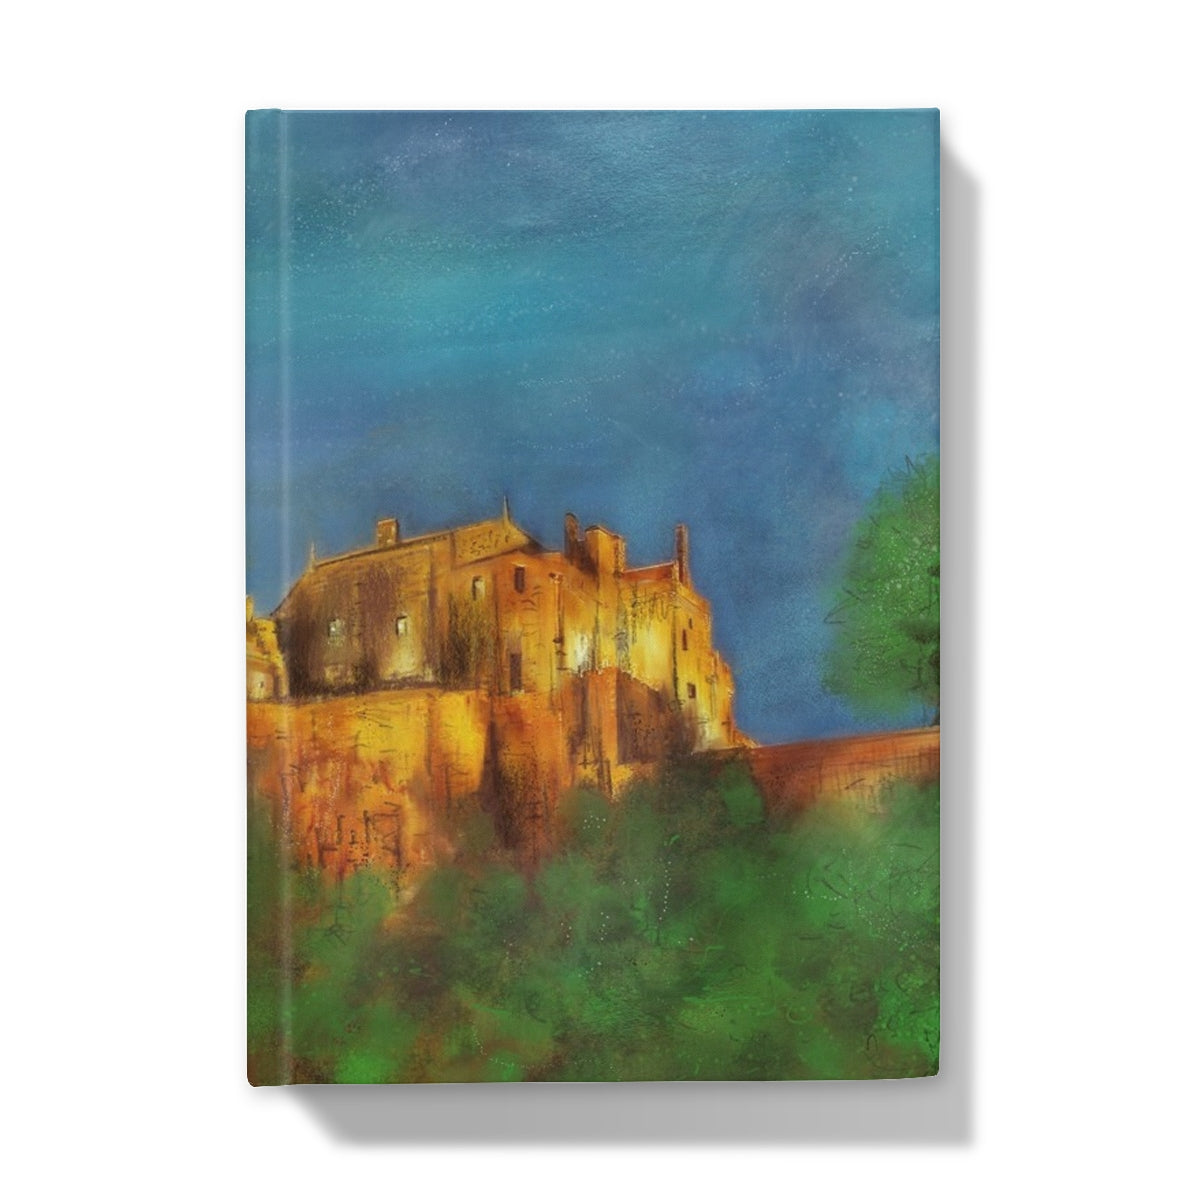 Stirling Castle Art Gifts Hardback Journal-Journals & Notebooks-Historic & Iconic Scotland Art Gallery-5"x7"-Lined-Paintings, Prints, Homeware, Art Gifts From Scotland By Scottish Artist Kevin Hunter